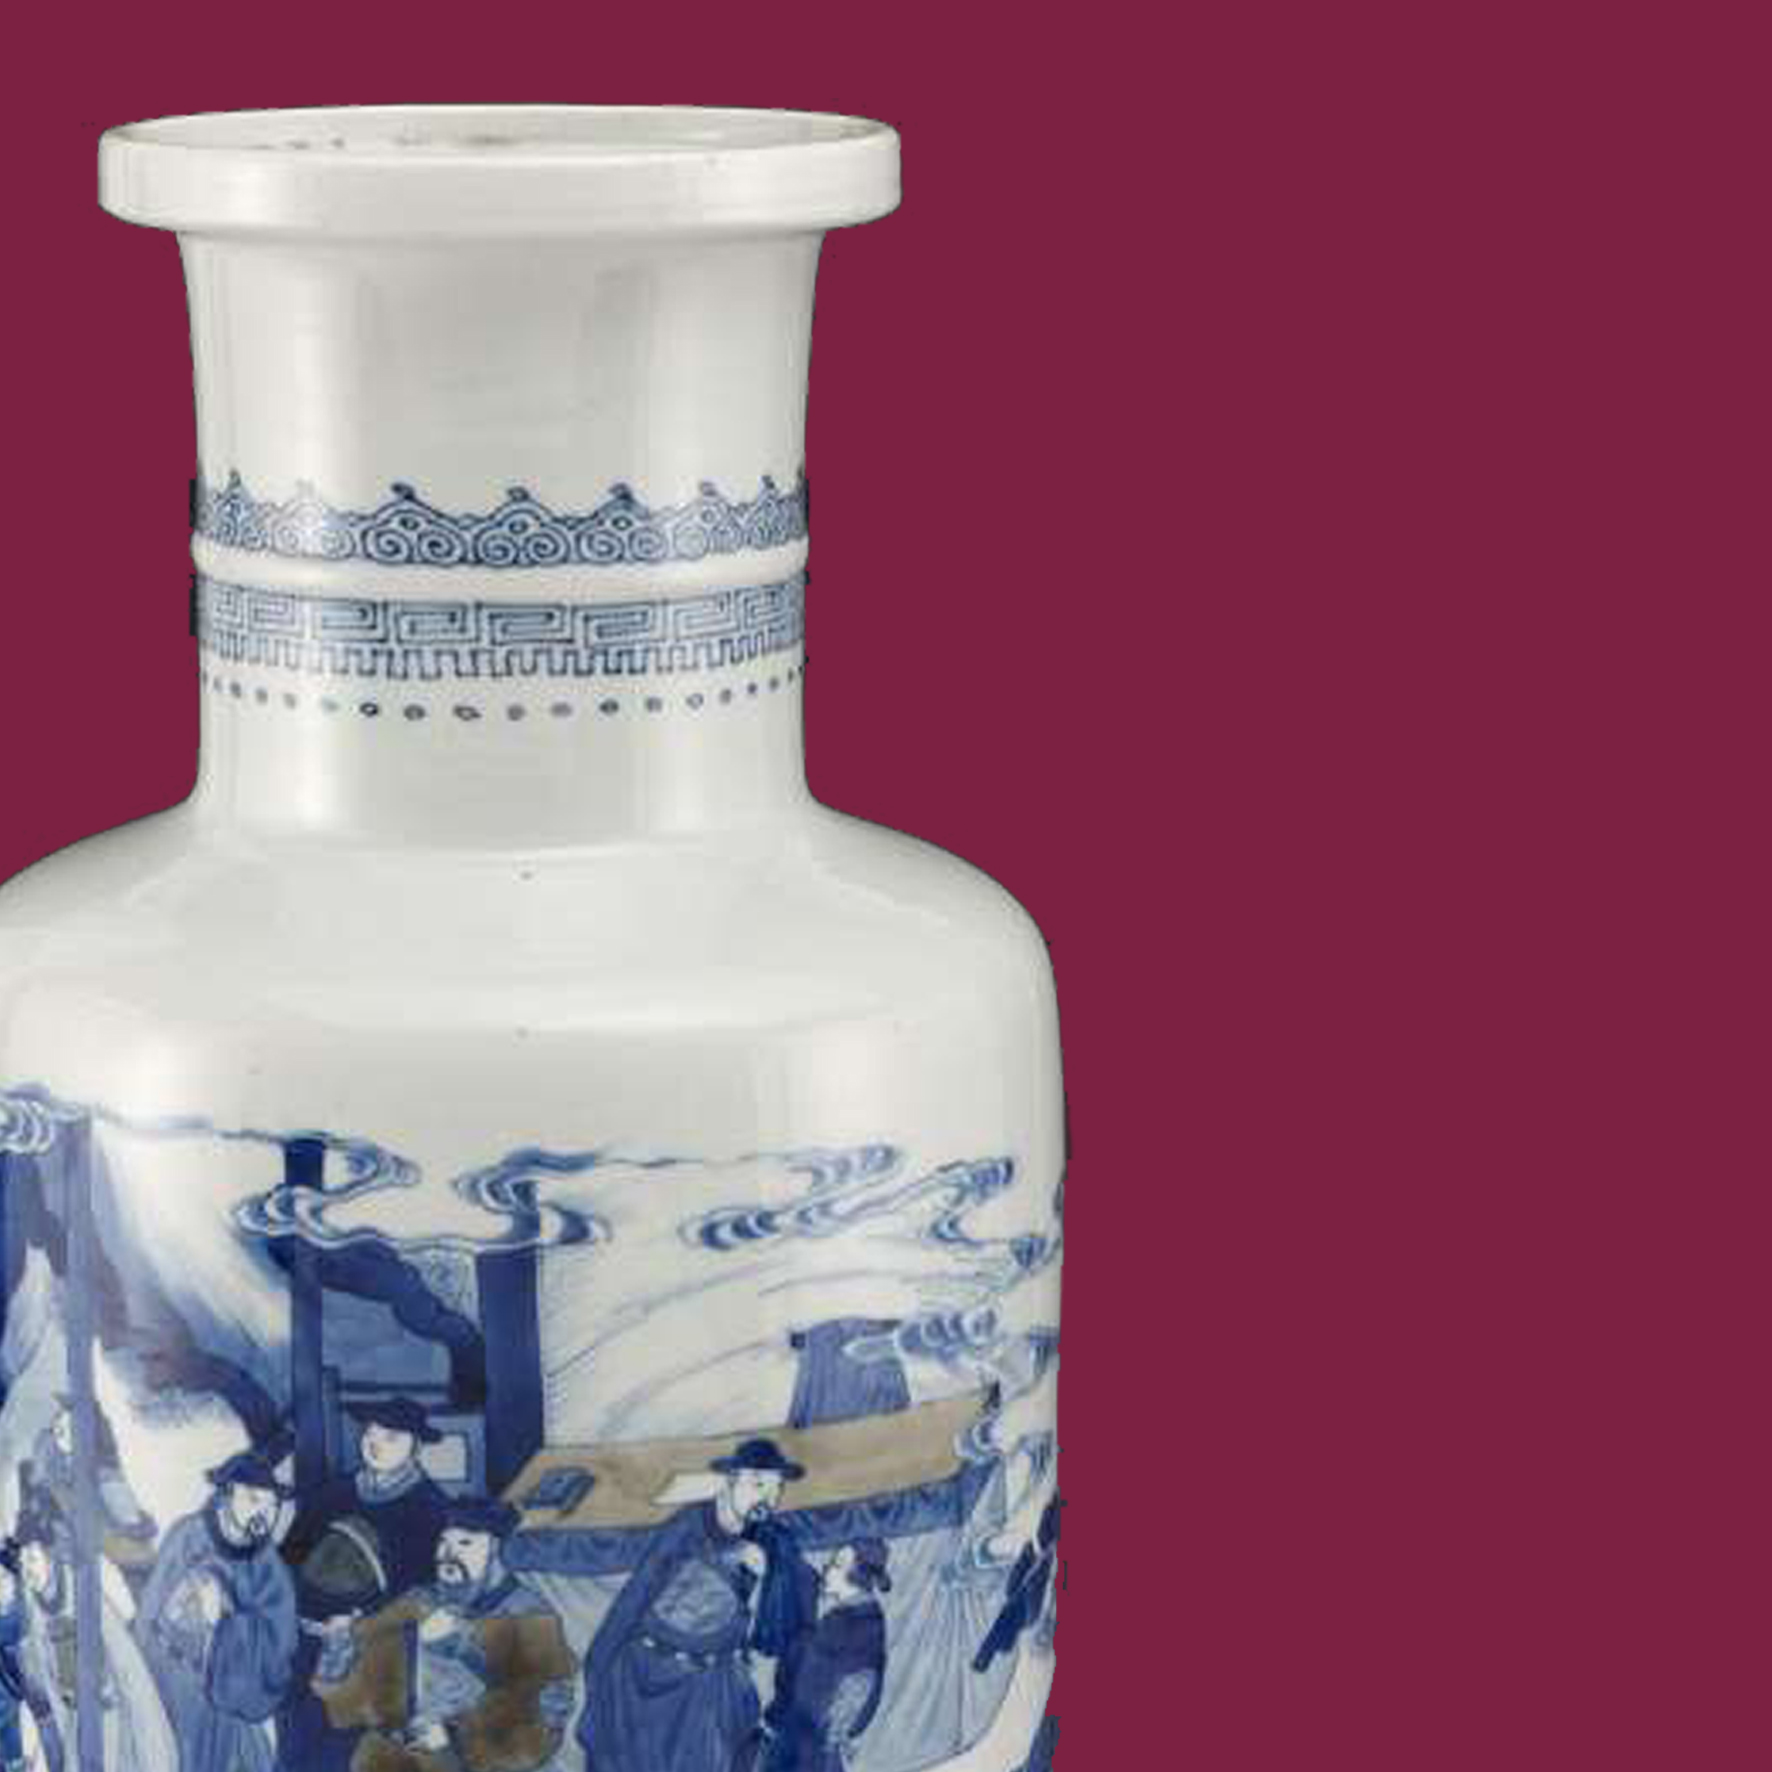 Masterpieces of Ancient Chinese Porcelain from The Shanghai Museum